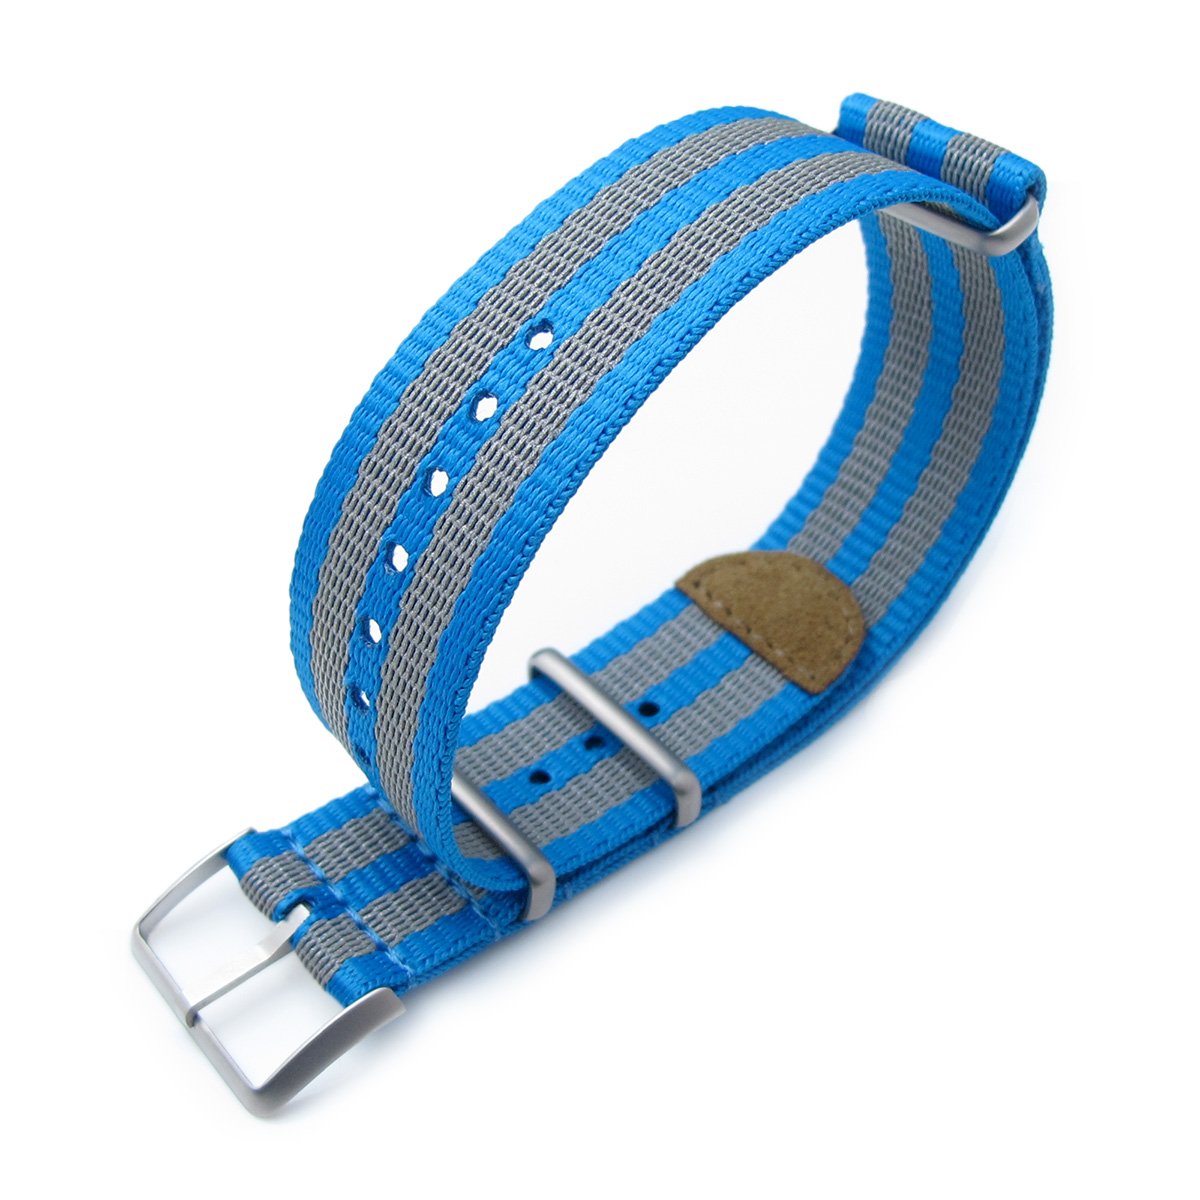 MiLTAT 22mm G10 NATO 3M Glow-in-the-Dark Watch Strap Brushed Blue and Grey Stripes Strapcode Watch Bands